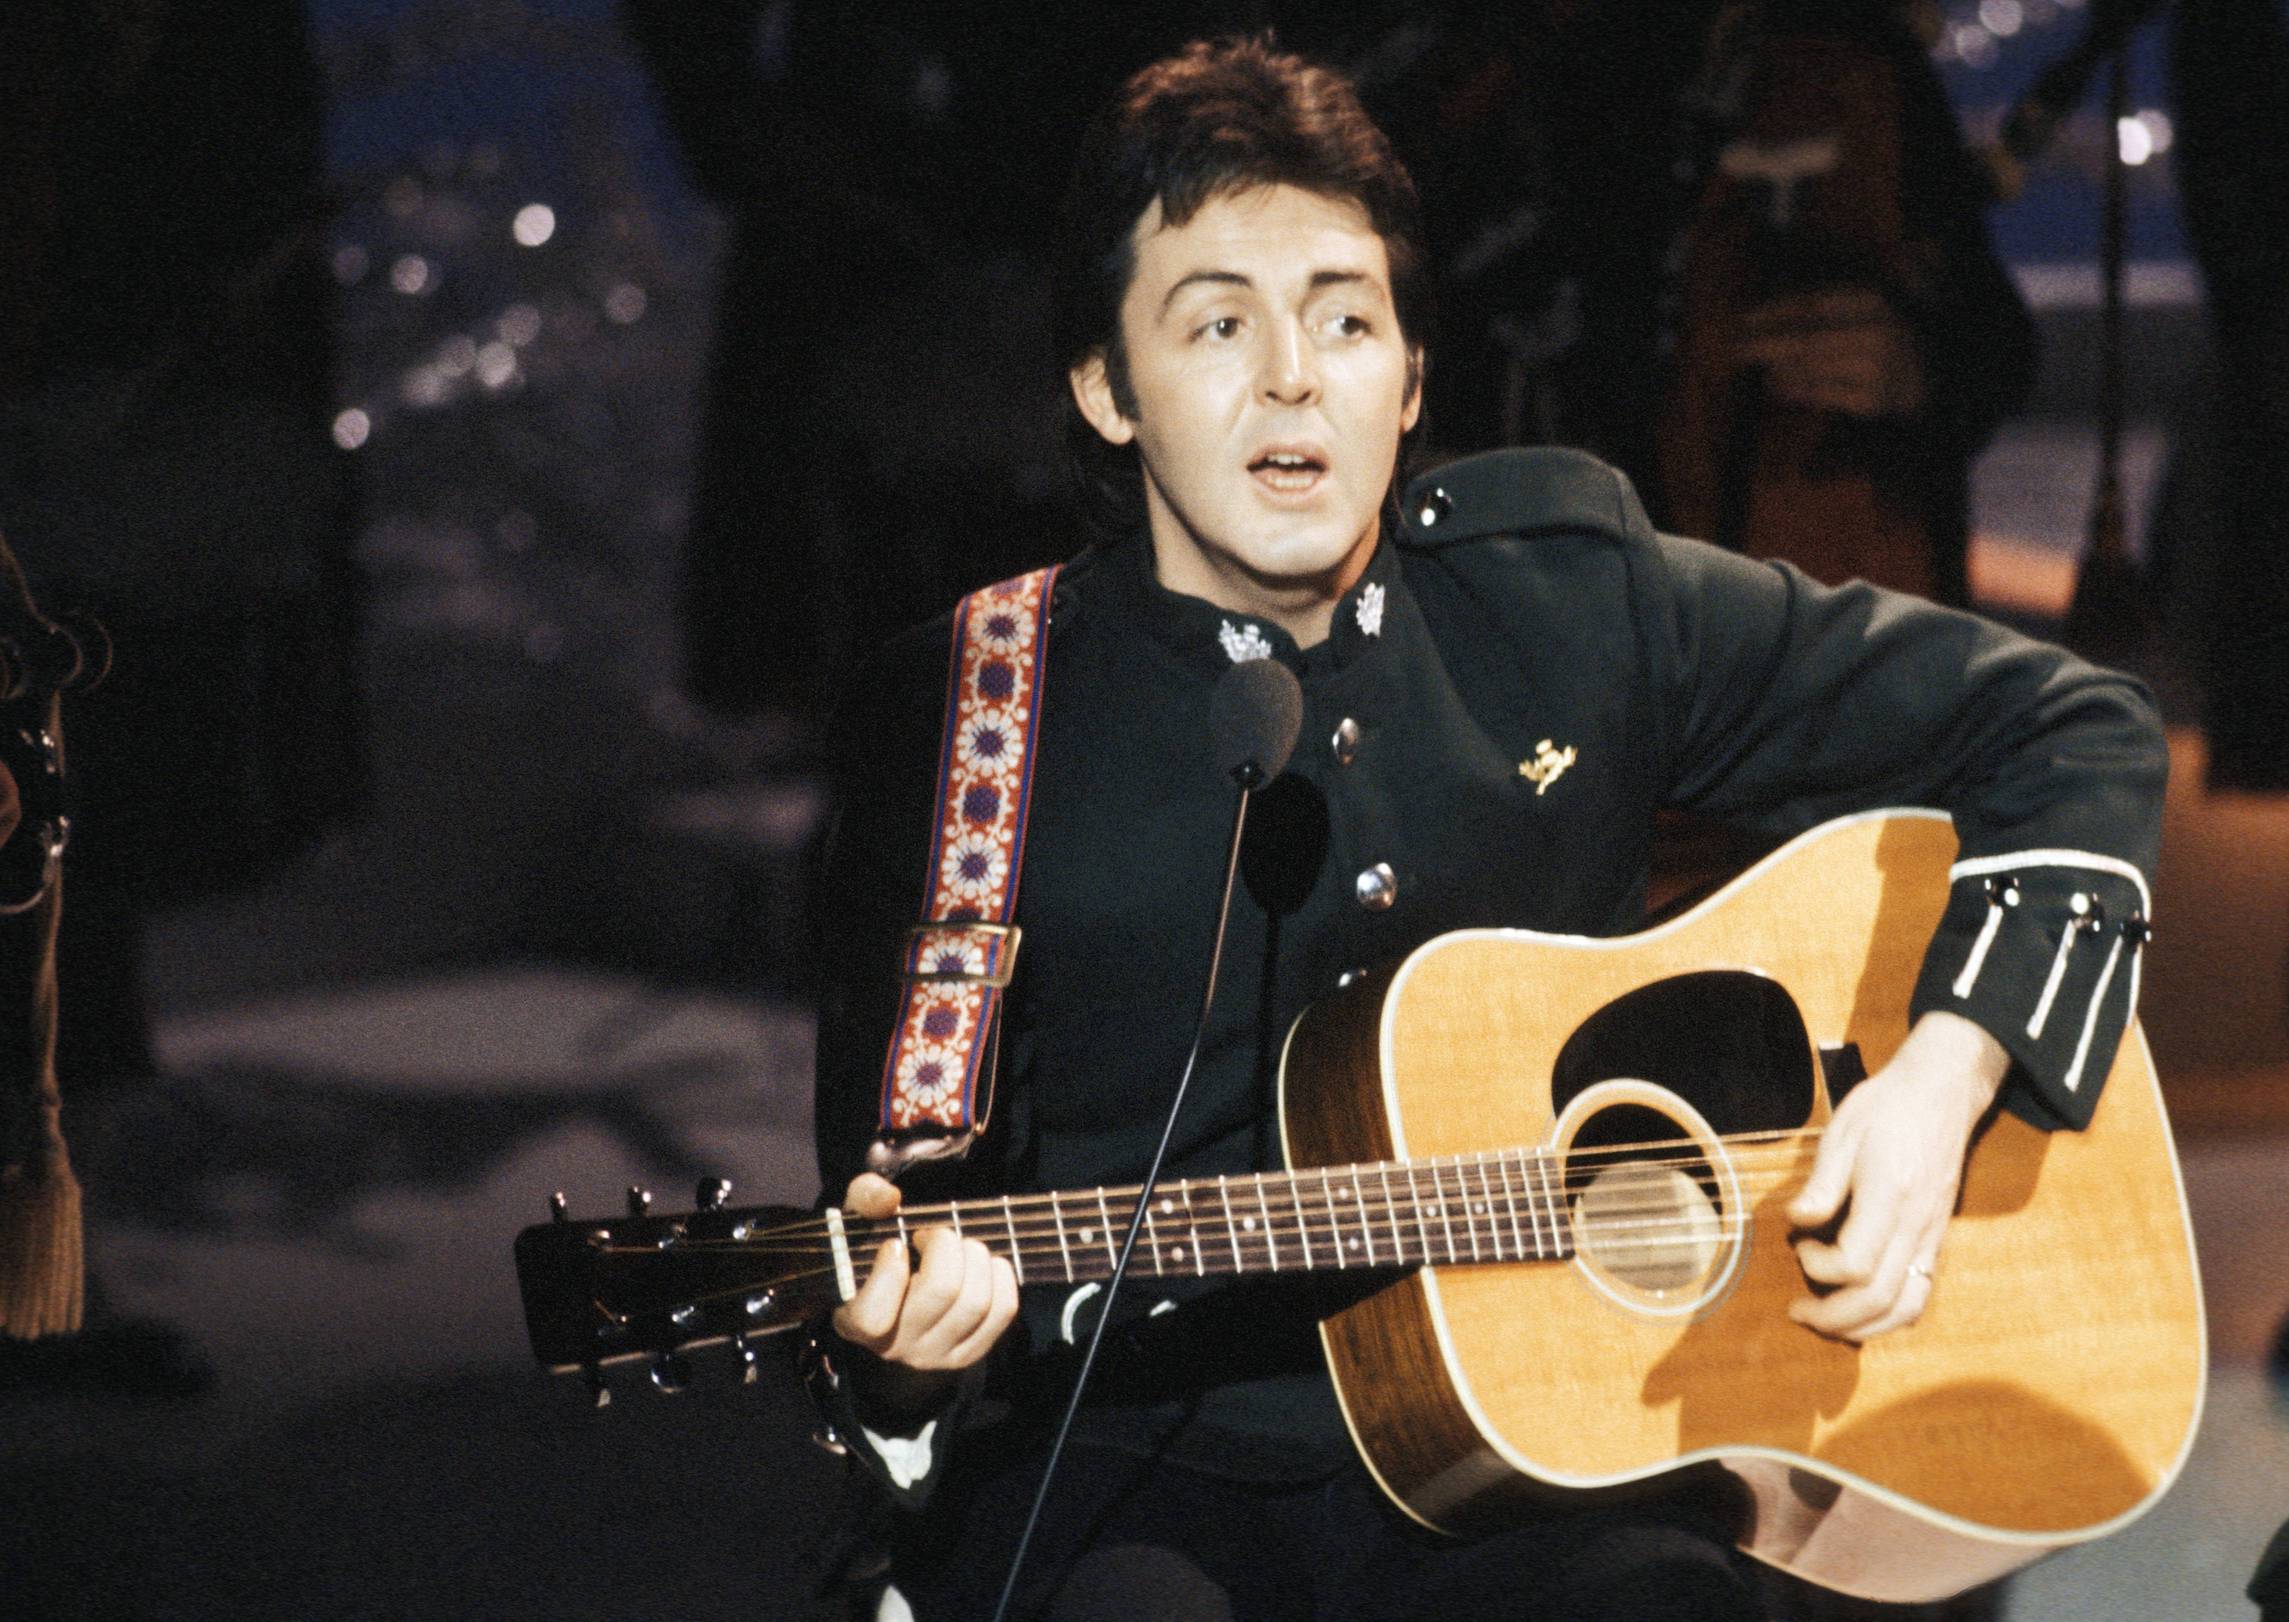 Paul McCartney and Wings perform on the Mike Yarwood Christmas Special